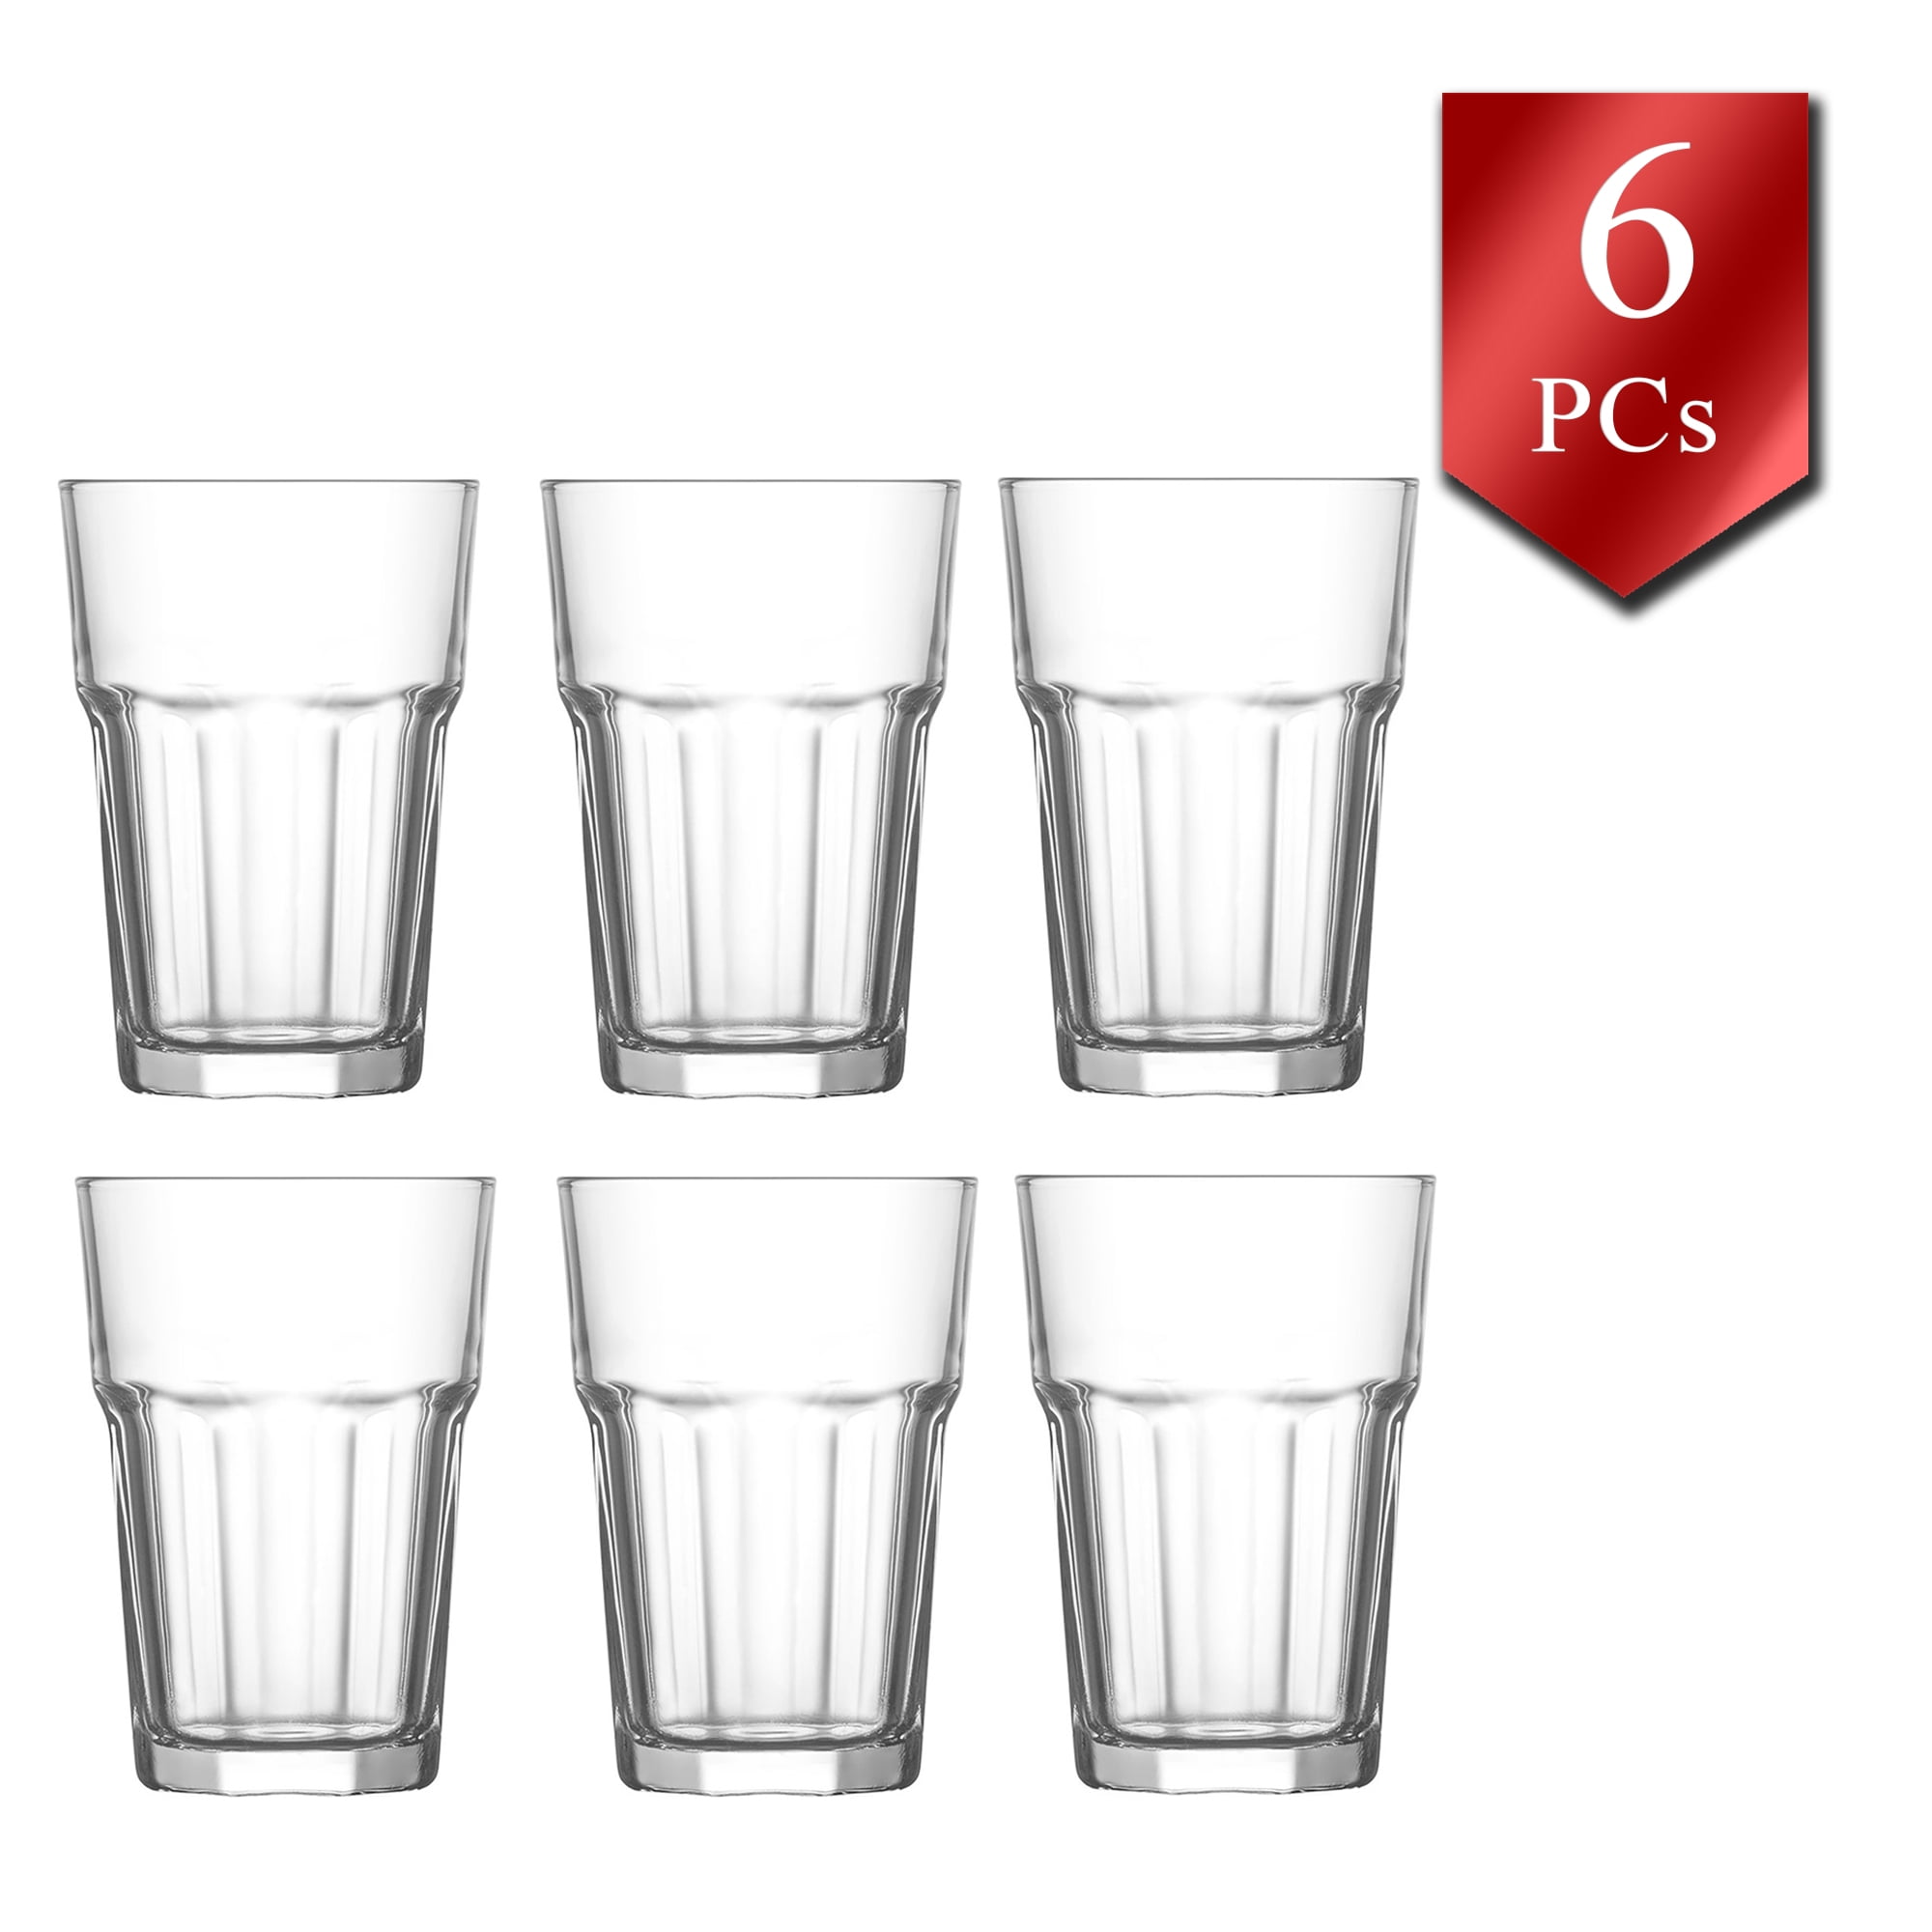 Clear Love Design Juice glass Color Water Cup 6 ounce Capacity set of 6 